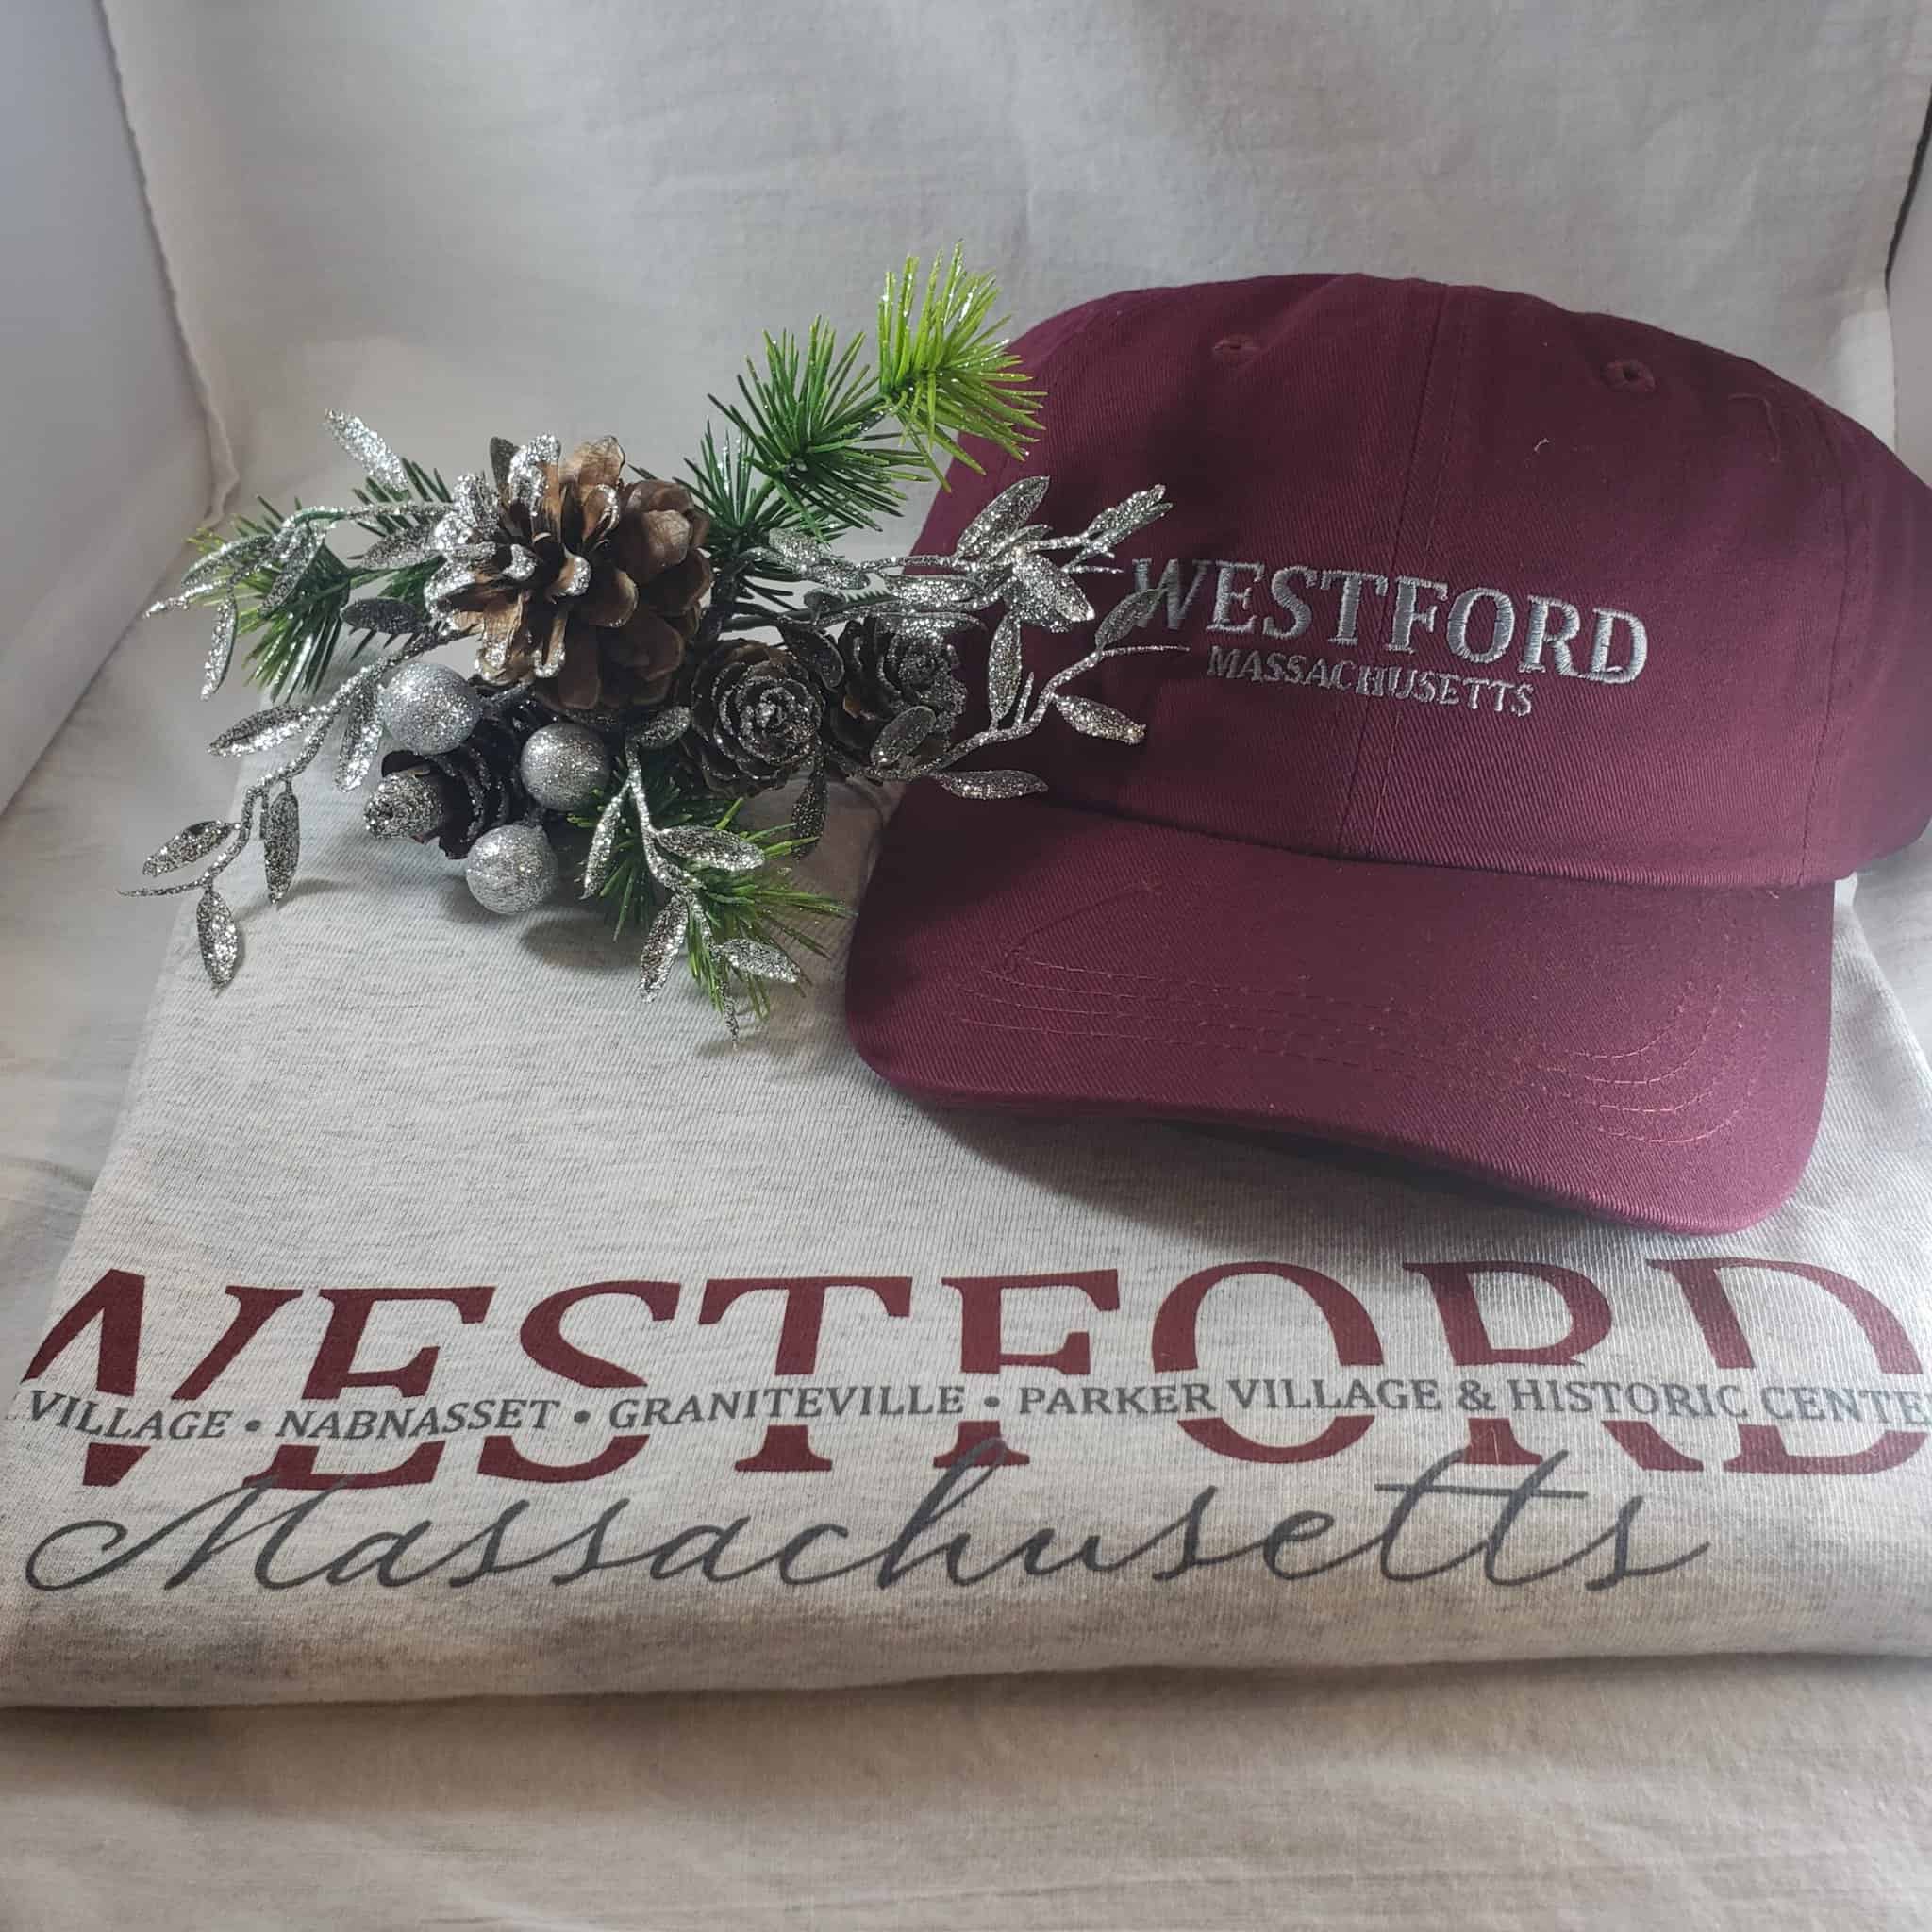 Visit the Westford Museum table at the Westford Academy Bazaar